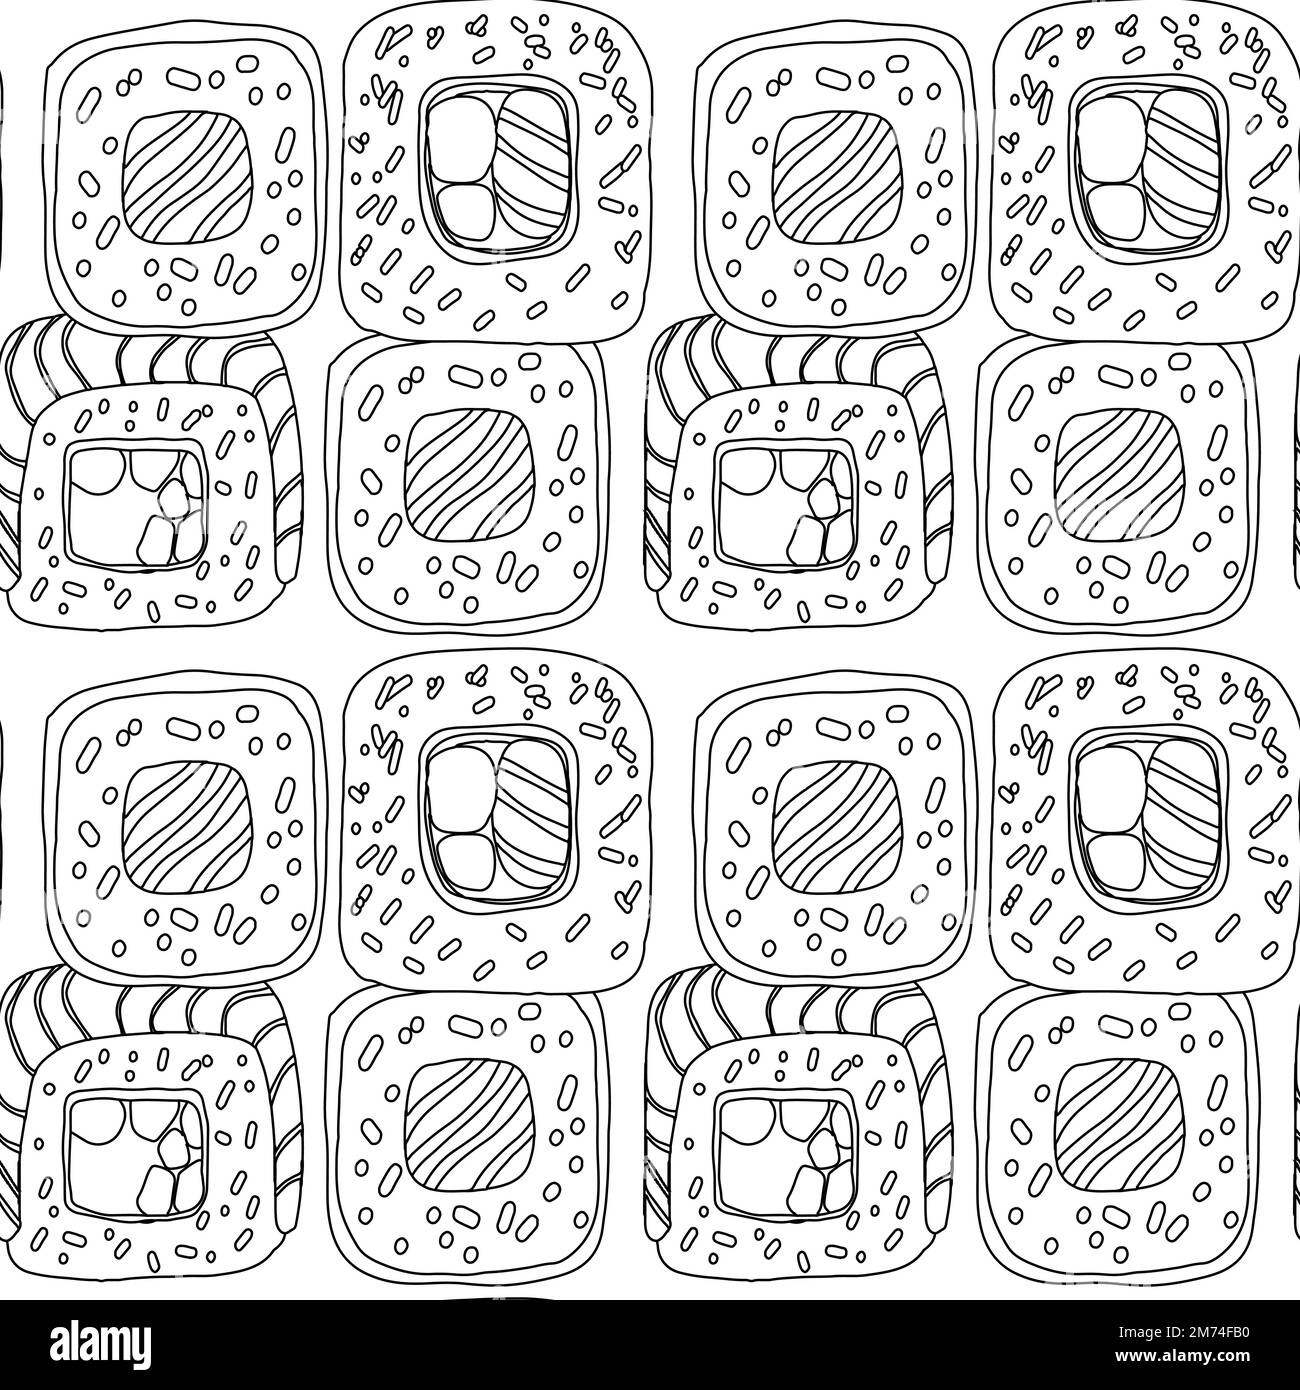 Seamless pattern with Sushi roll illustration in doodle style black color on white background Stock Vector